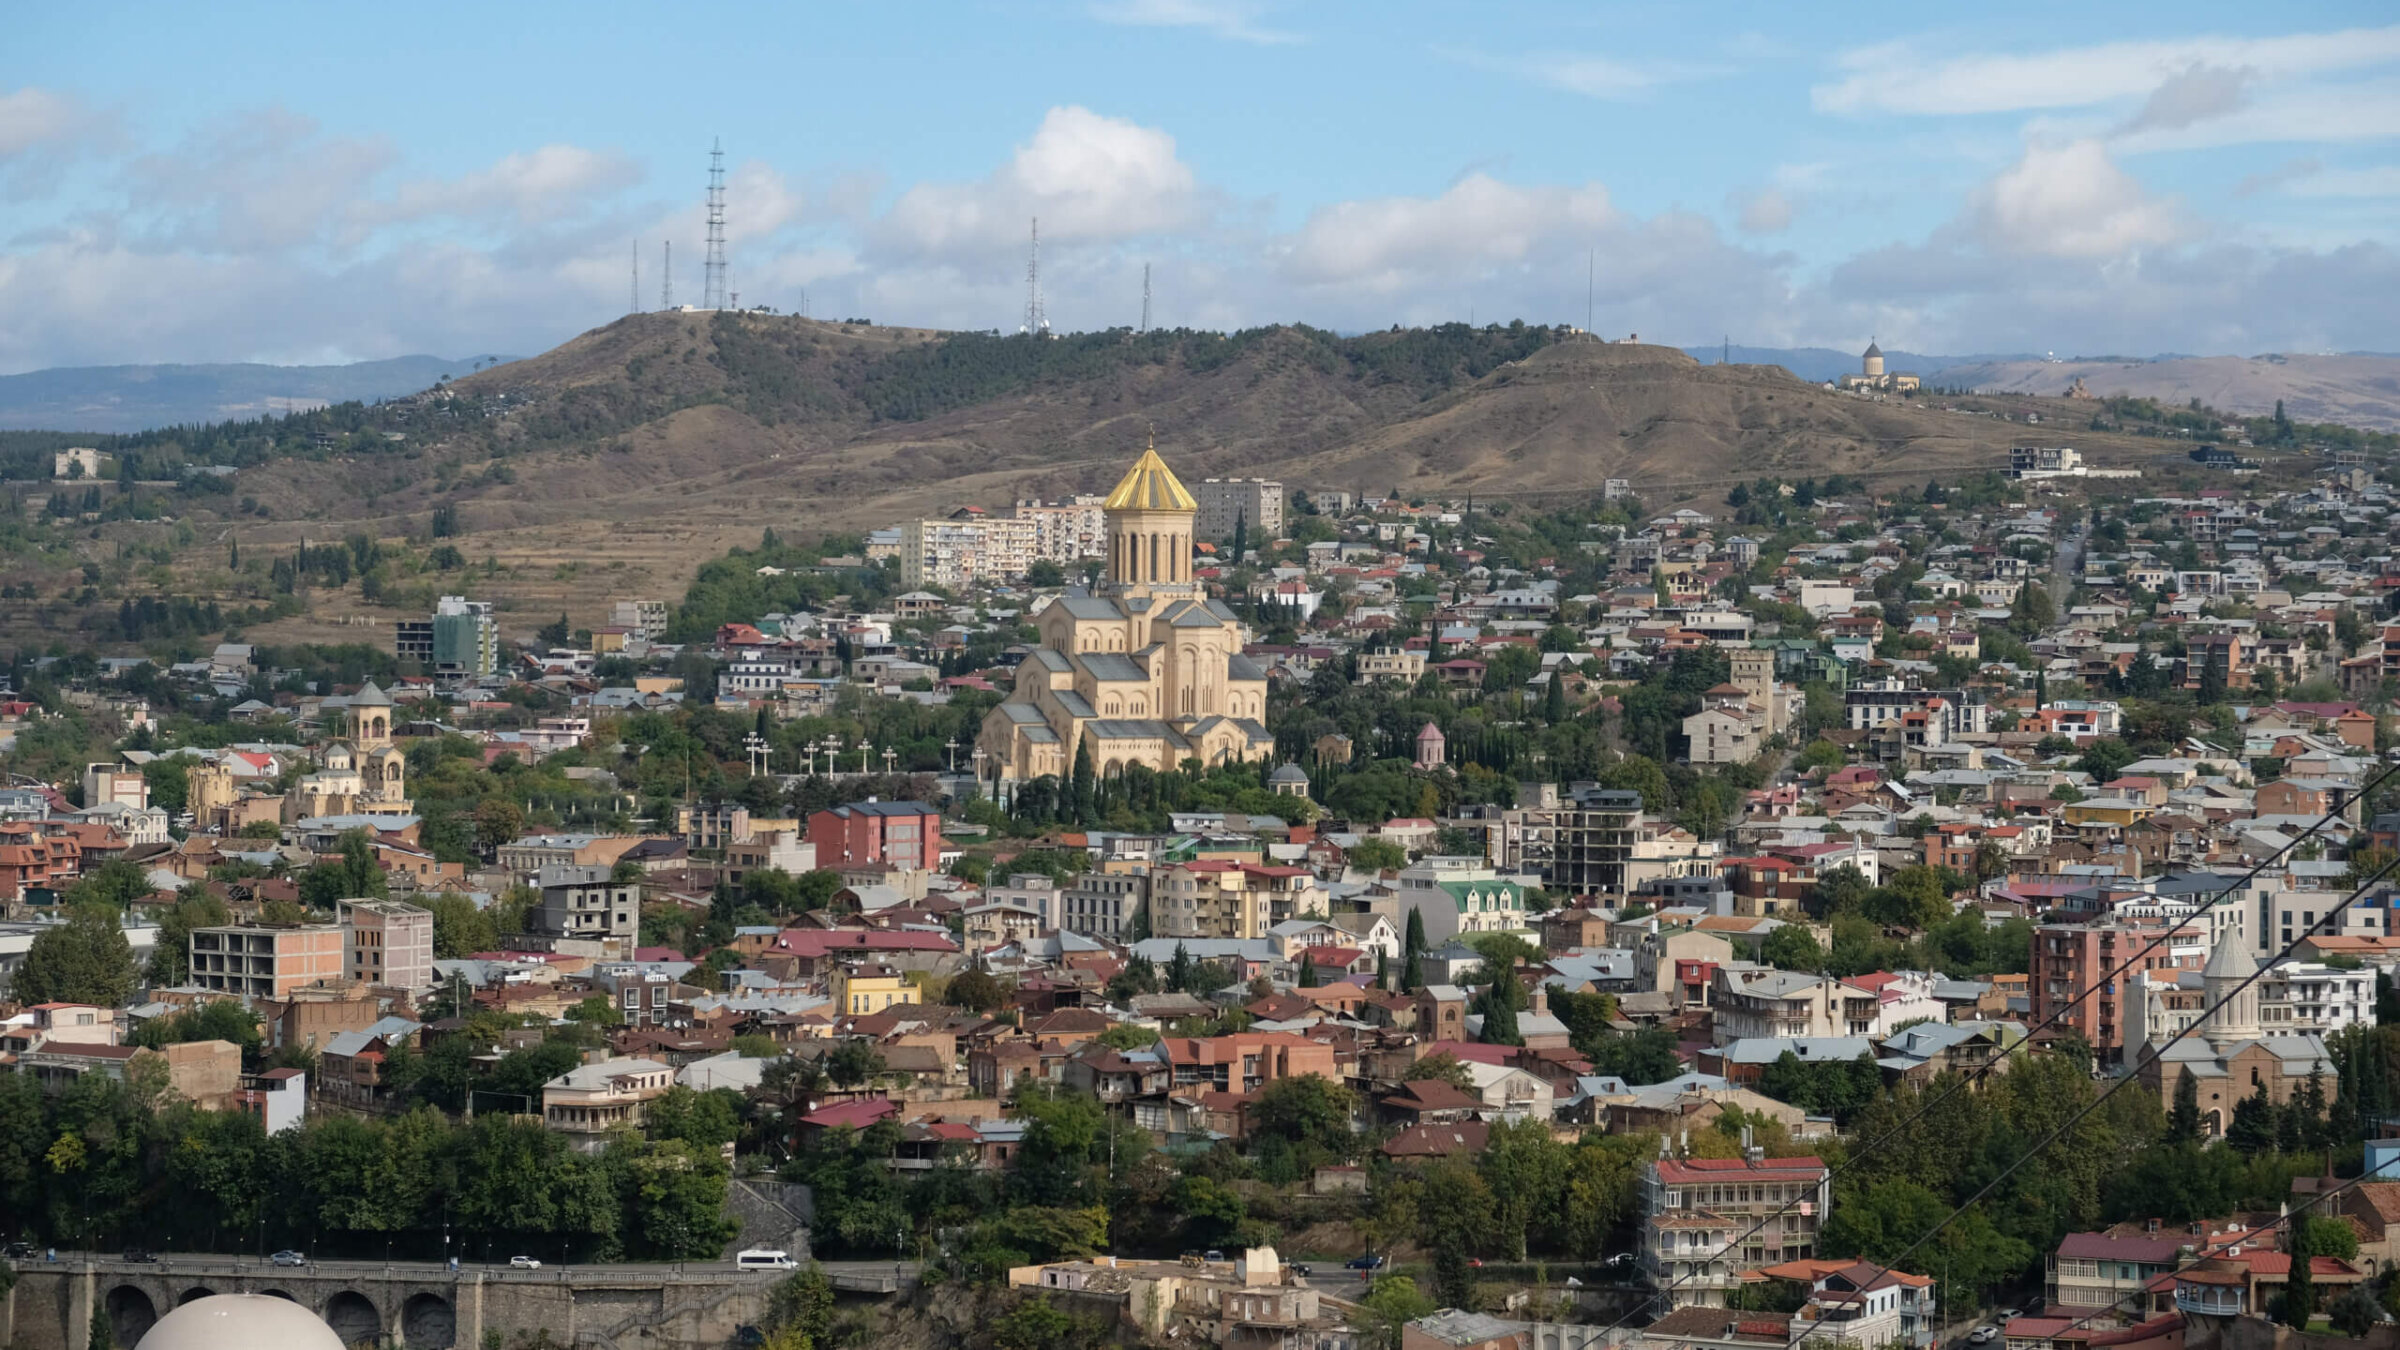 A view of Tbilisi, Georgia, seen from a hilltop.